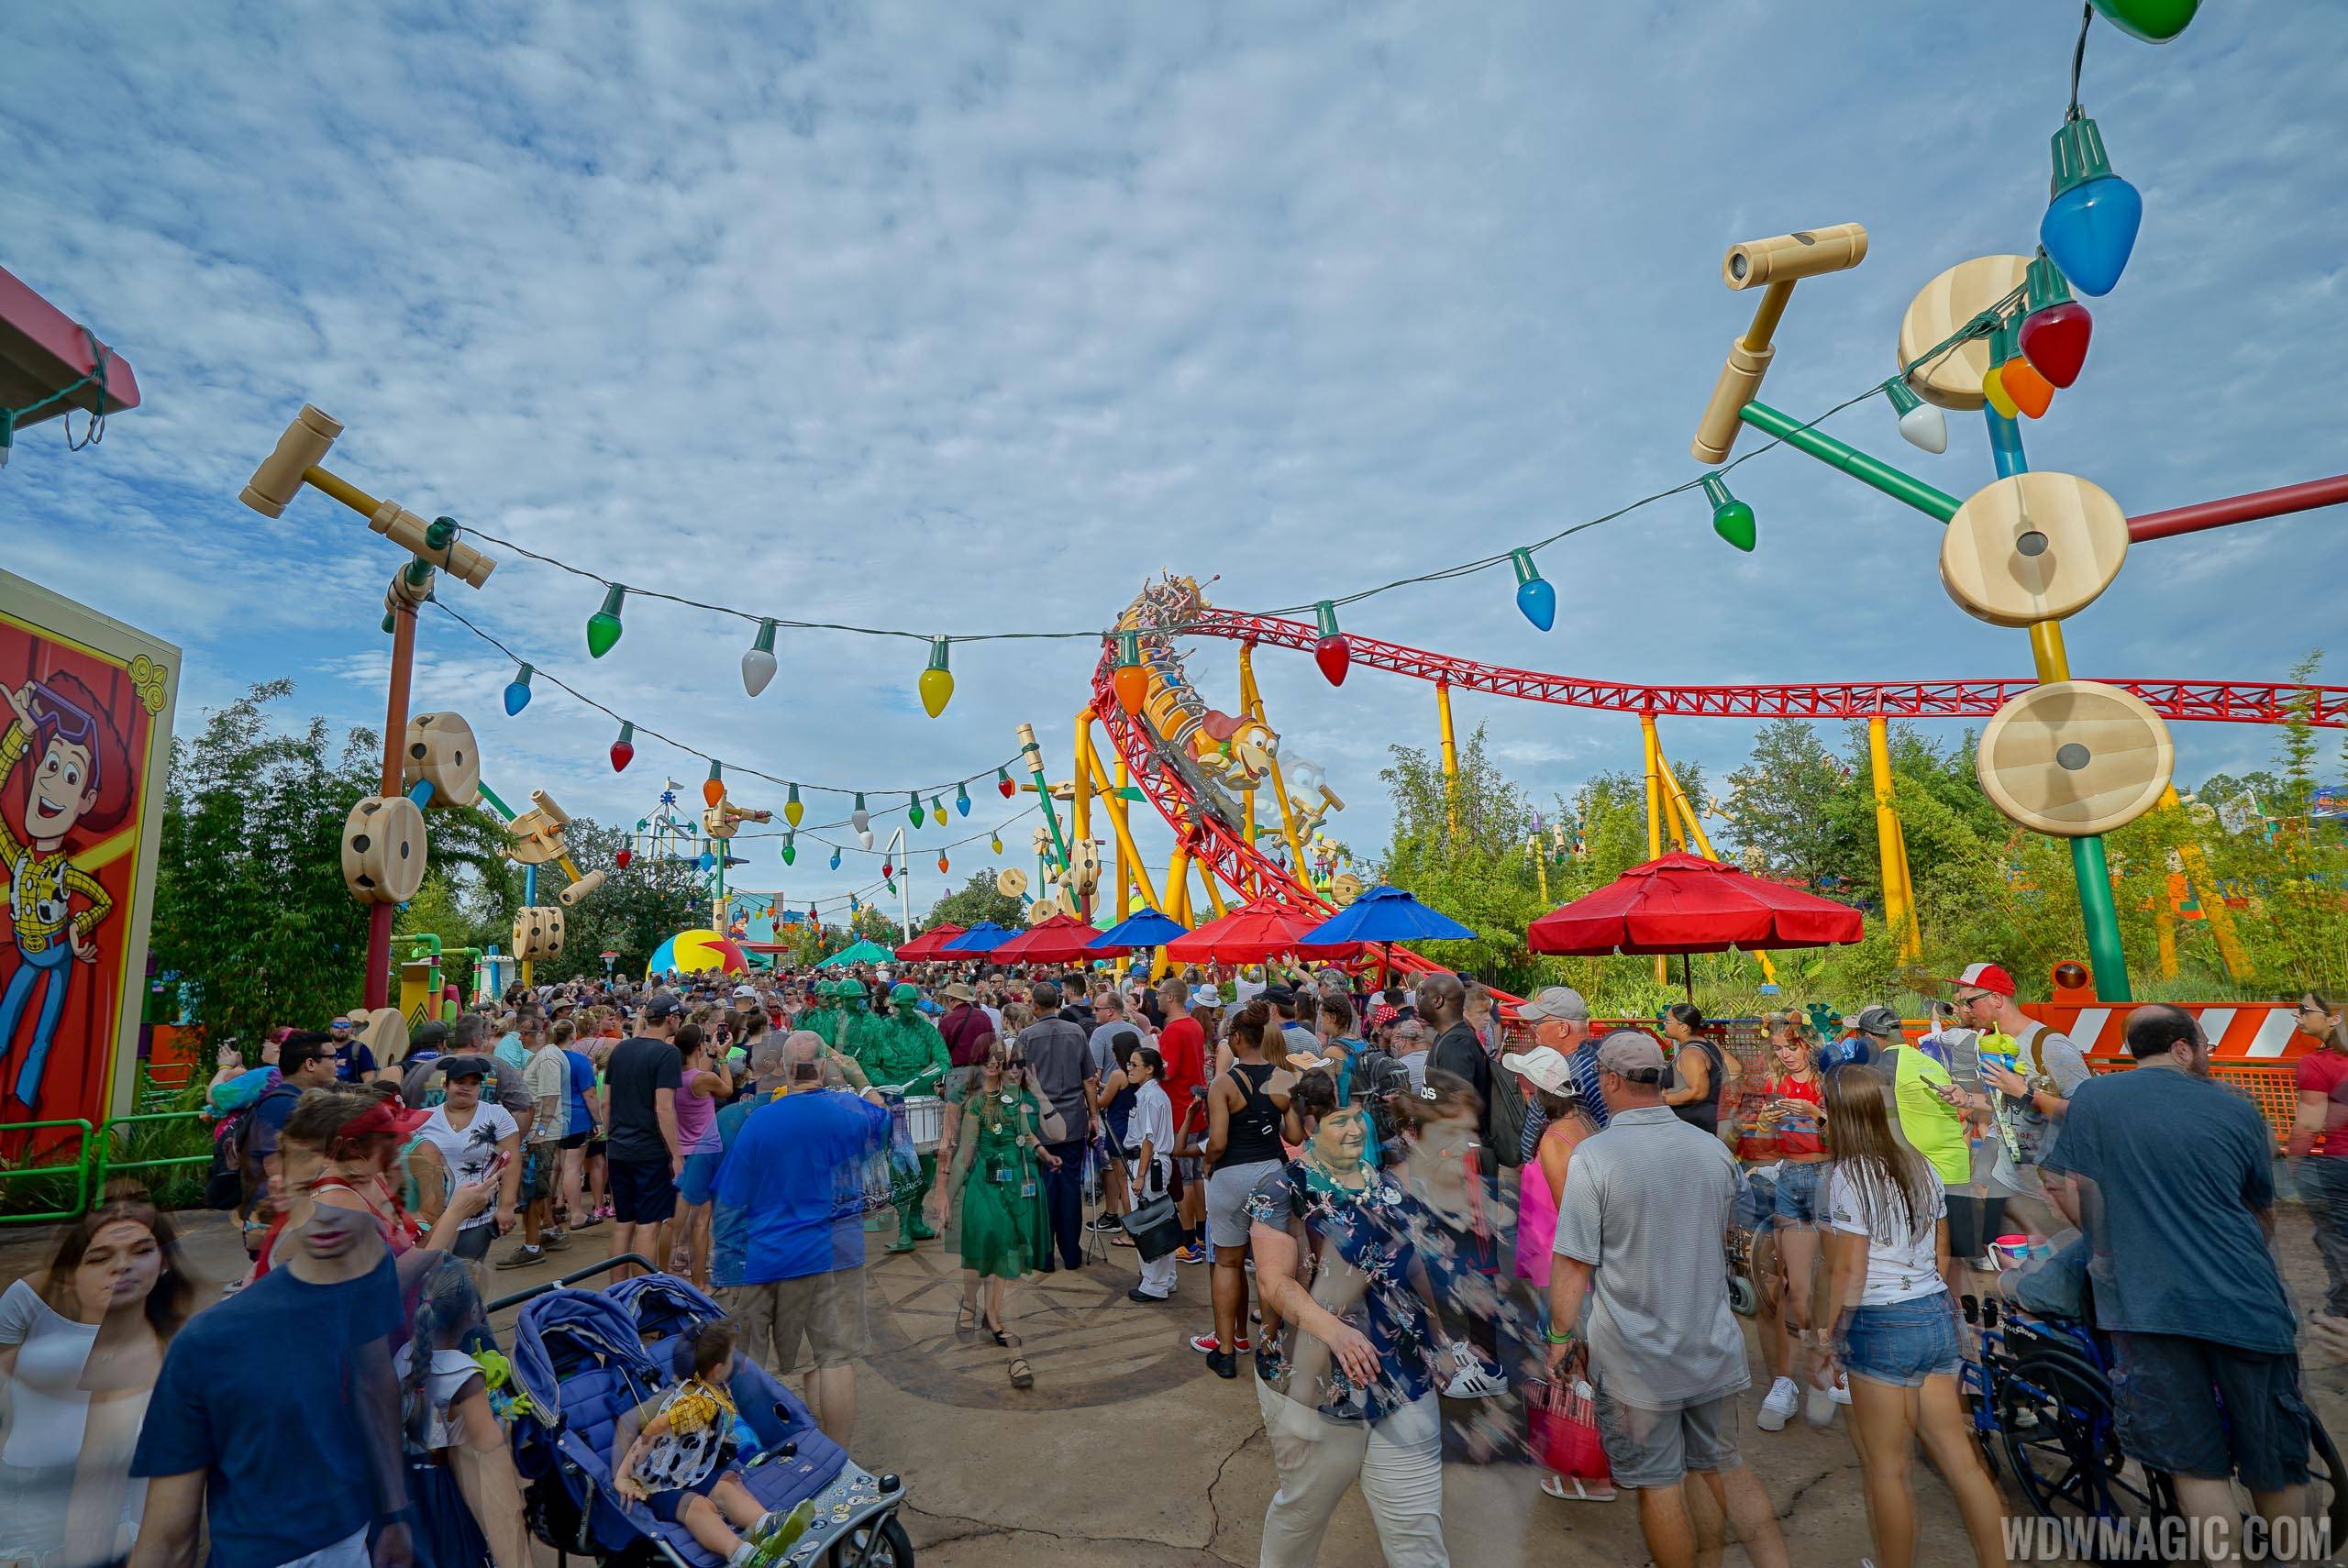 Crowds quickly gathered inside Toy Story Land